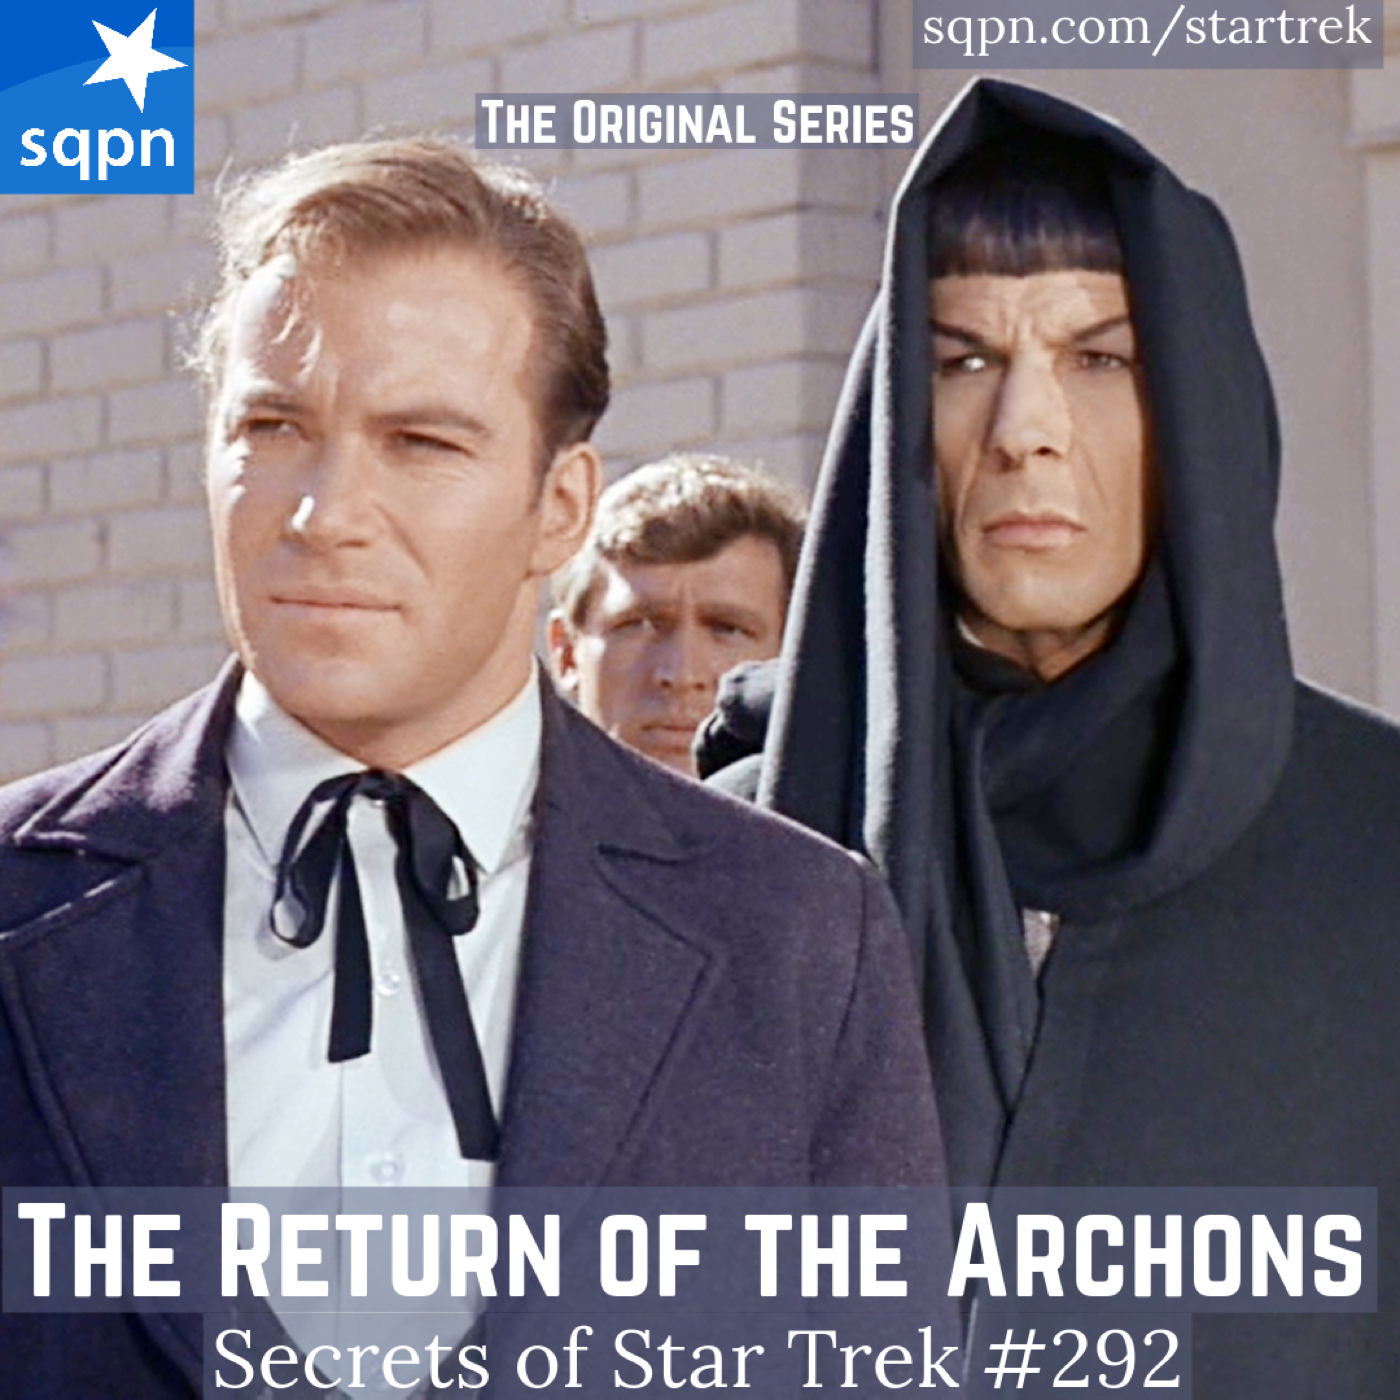 The Return of the Archons (TOS)